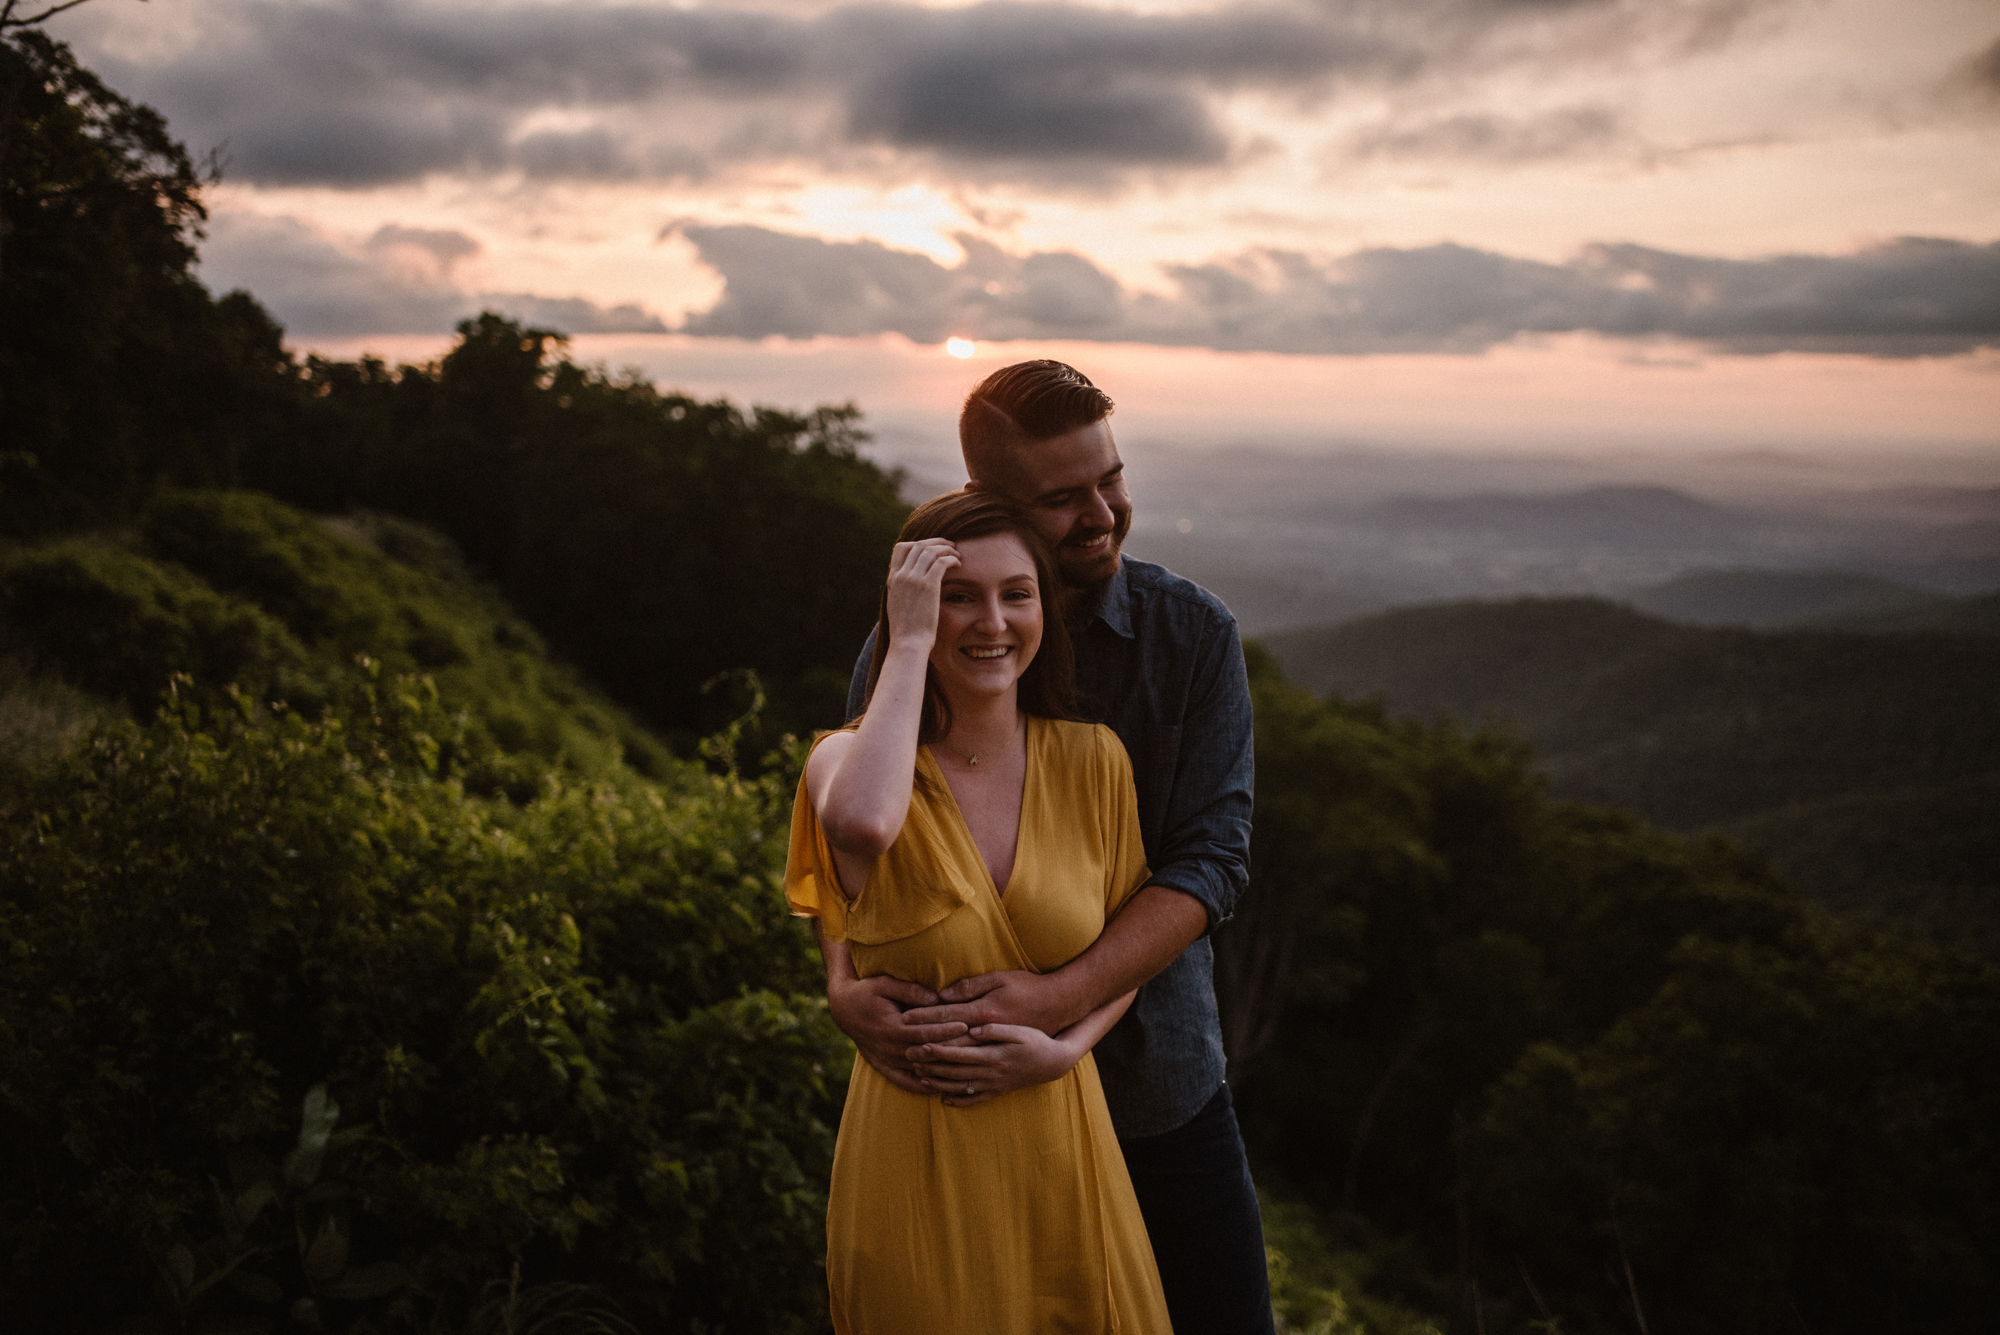 Camryn and Larry Sunrise Engagement Session in Shenandoah National Park - Things to Do in Luray Virginia - Adventurous Couple Photo Shoot White Sails Creative_3.jpg